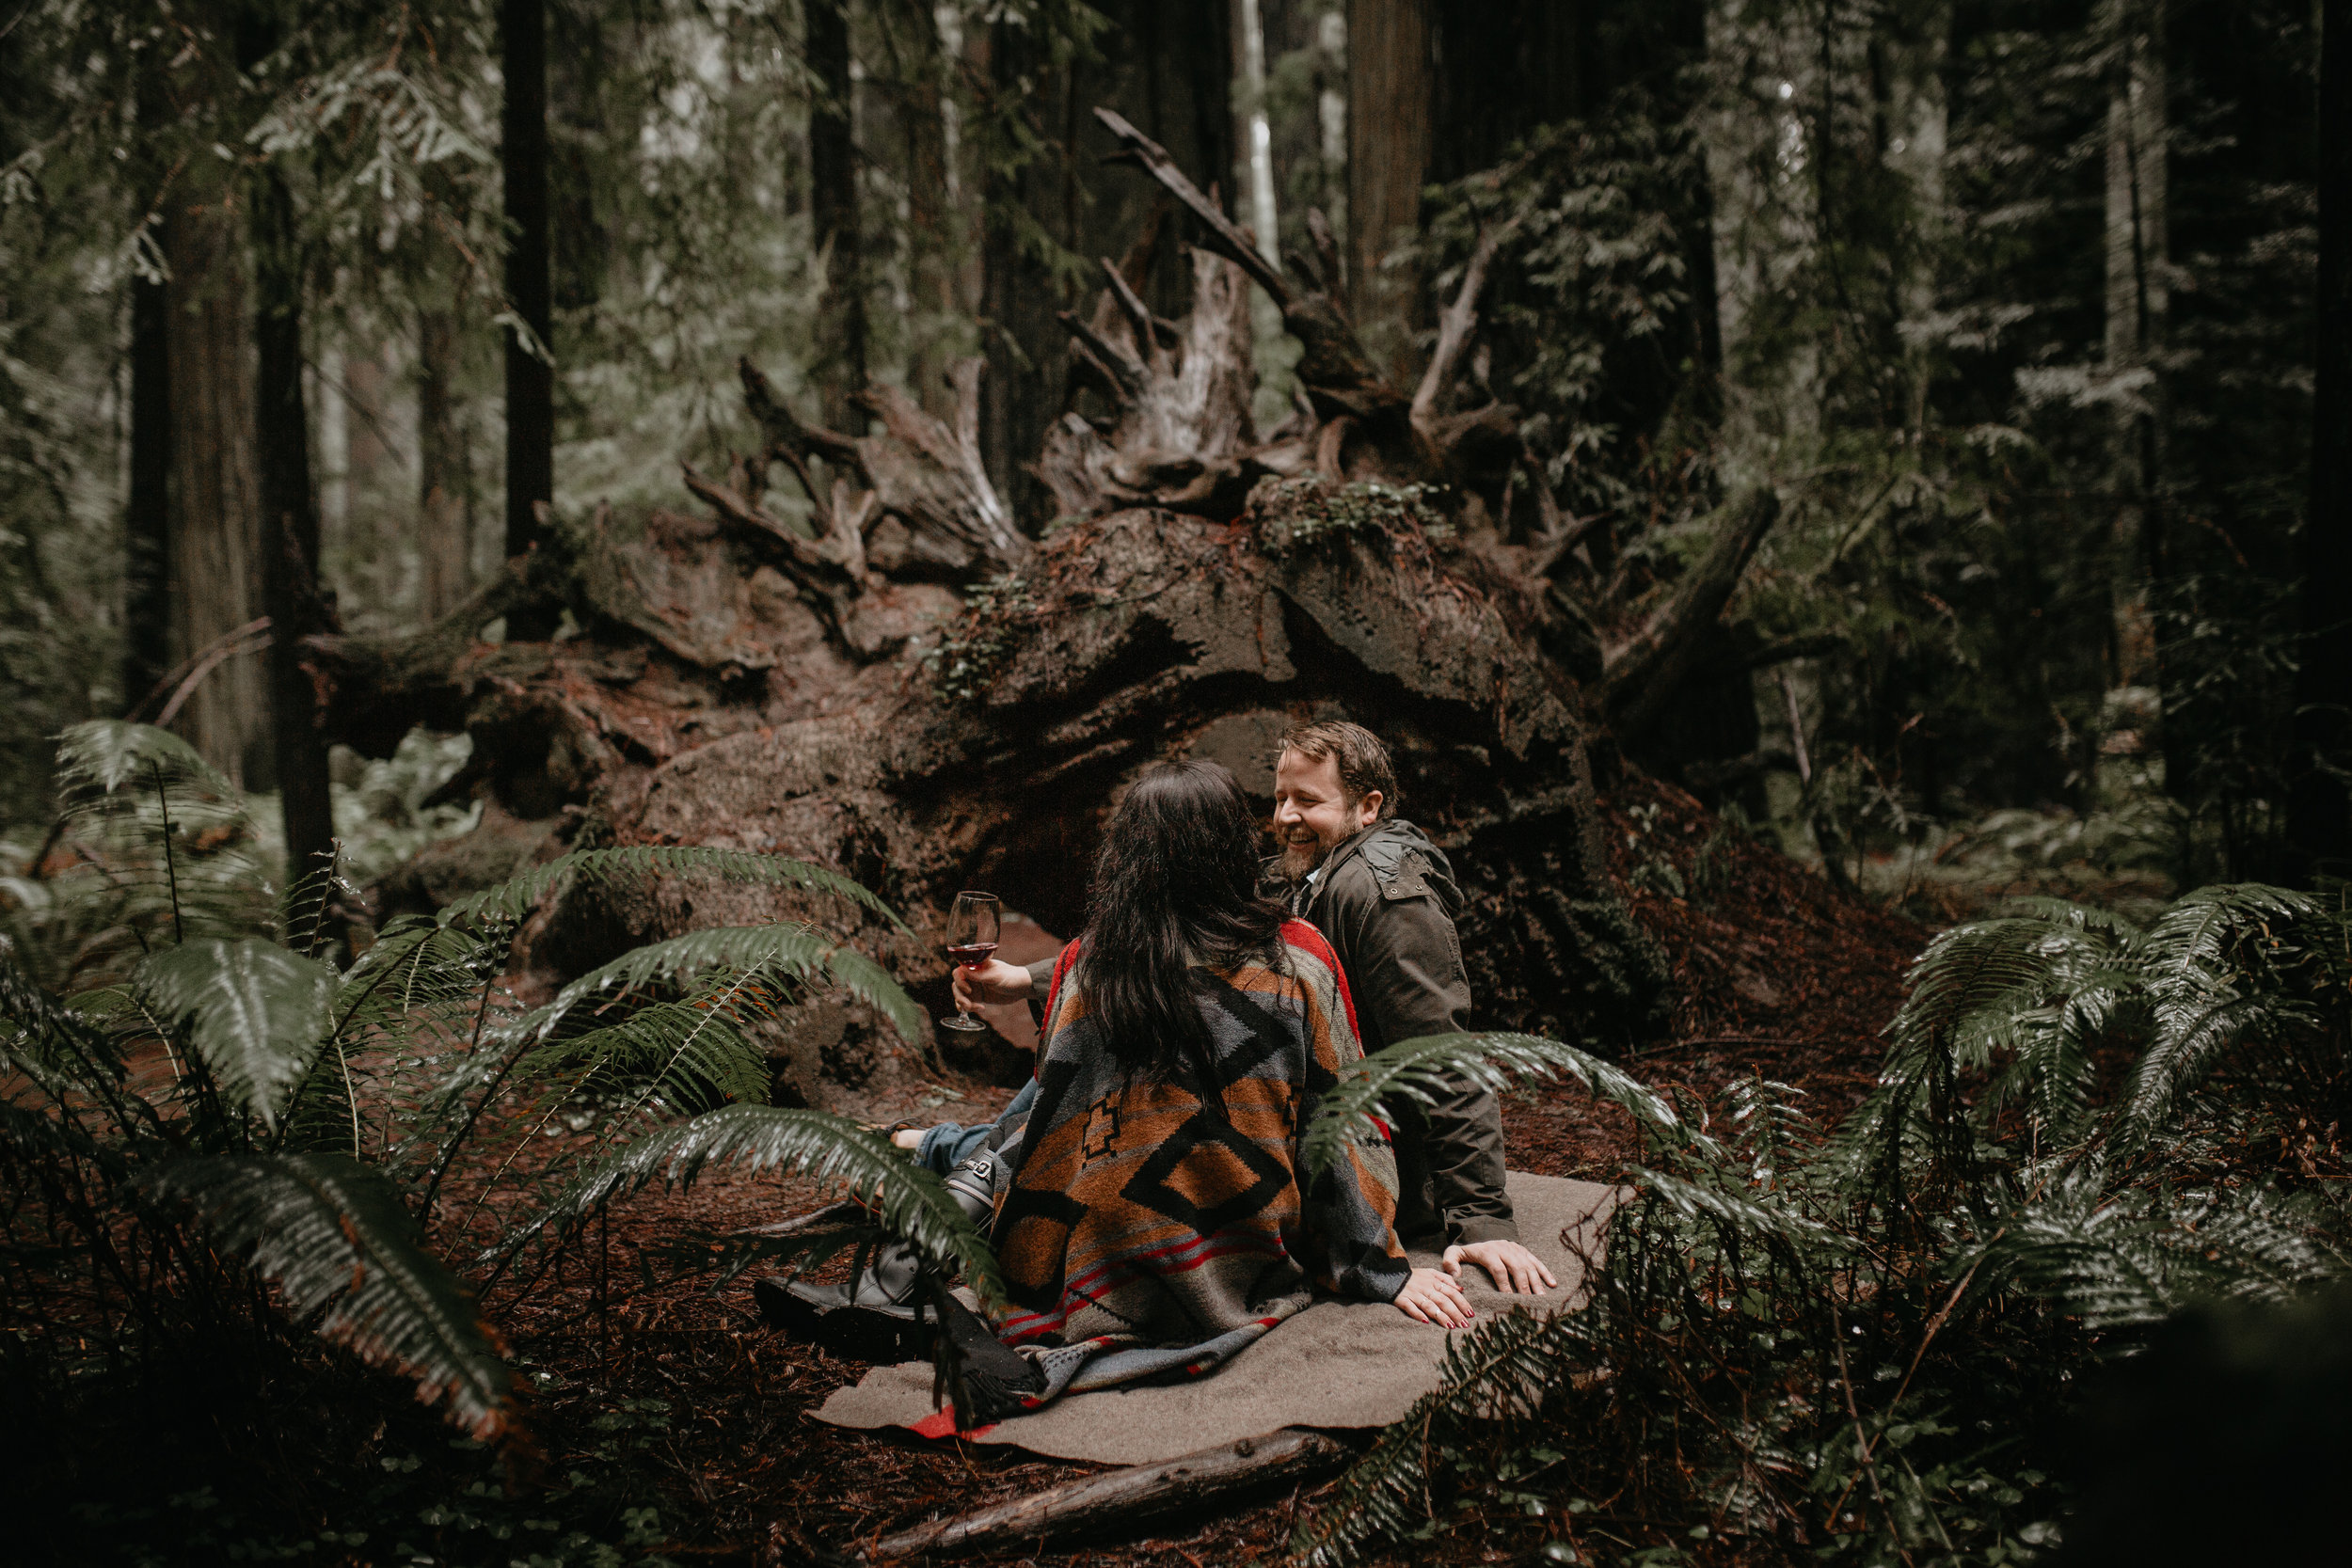 nicole-daacke-photography-redwoods-national-park-forest-rainy-foggy-adventure-engagement-session-humboldt-county-old-growth-redwood-tree-elopement-intimate-wedding-photographer-19.jpg